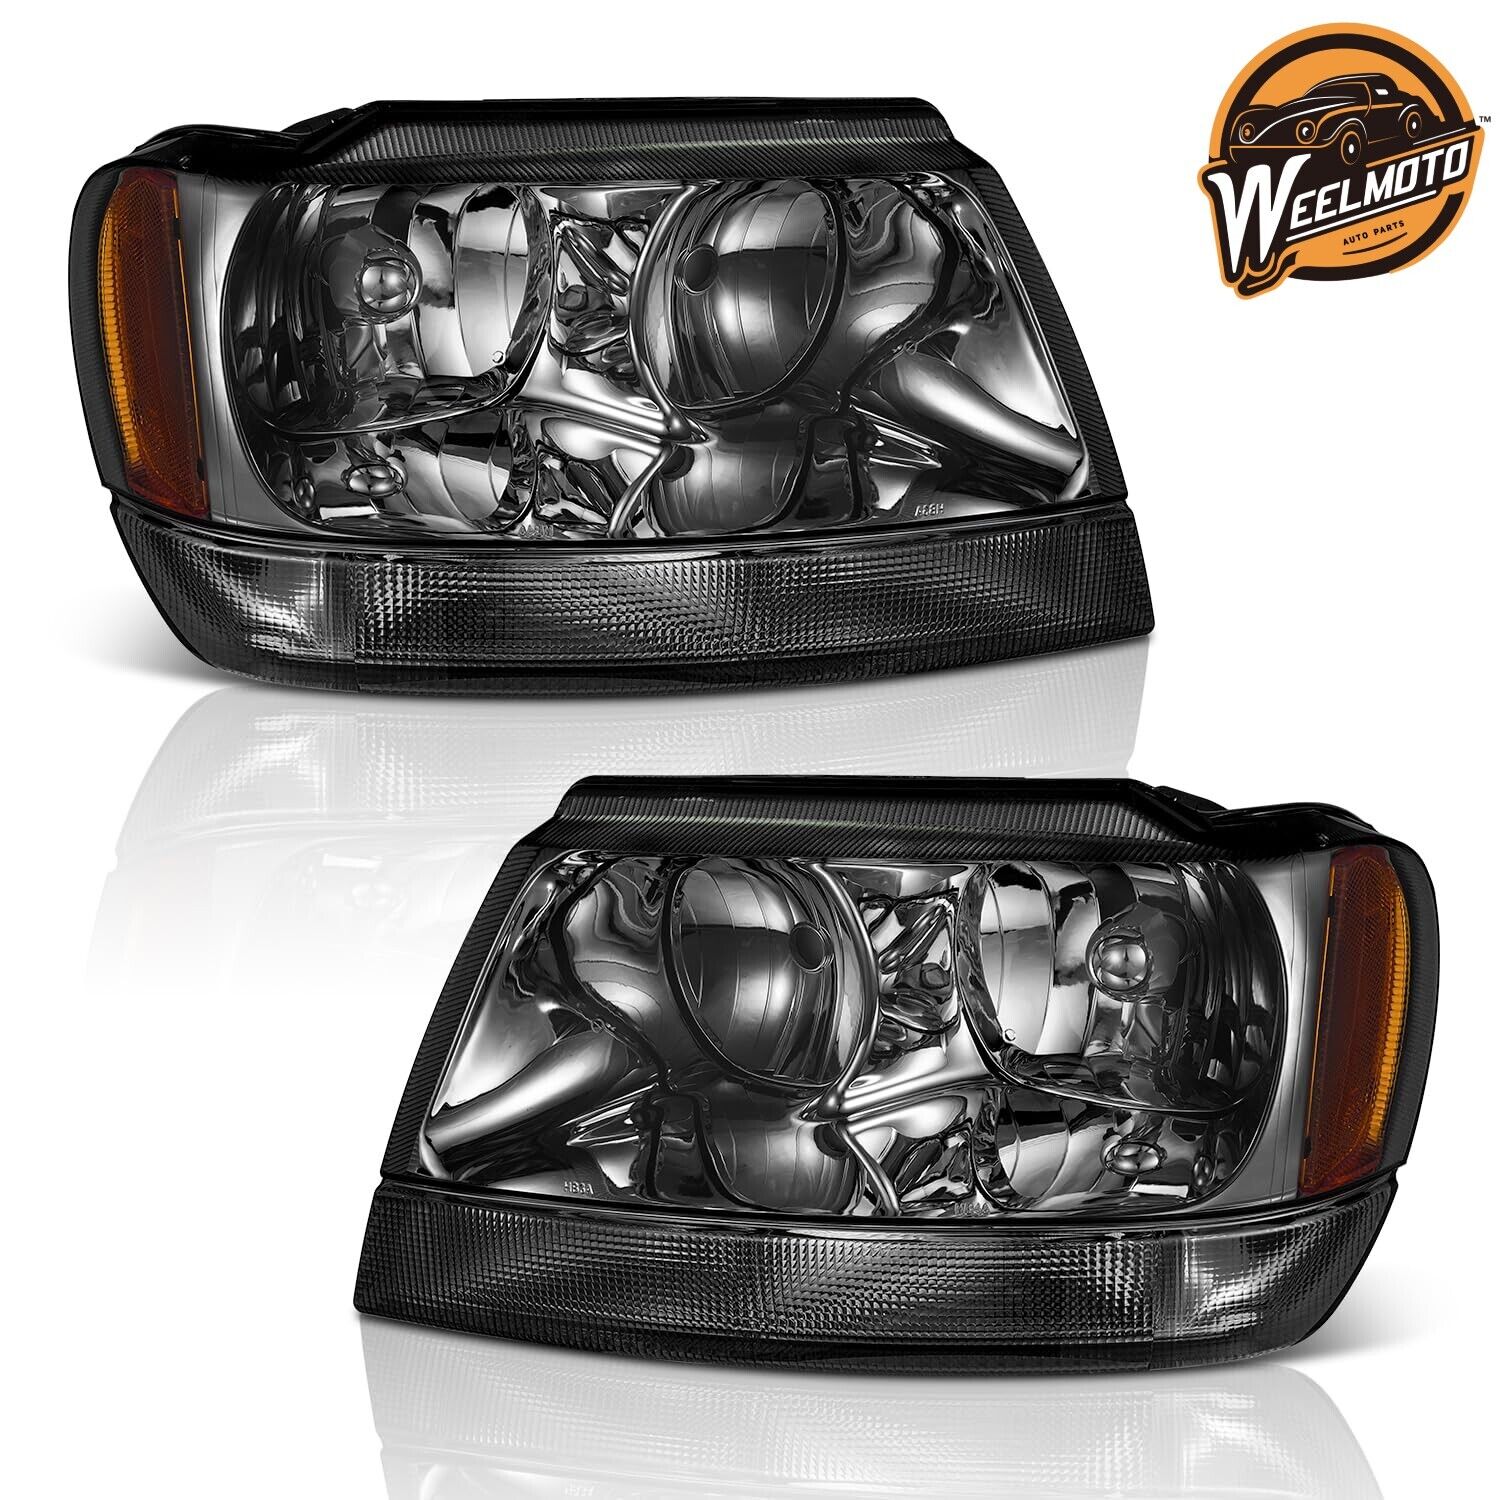 WEELMOTO For 1999-2004 Jeep Grand Cherokee Headlights Assembly Smoke Lamps L+R